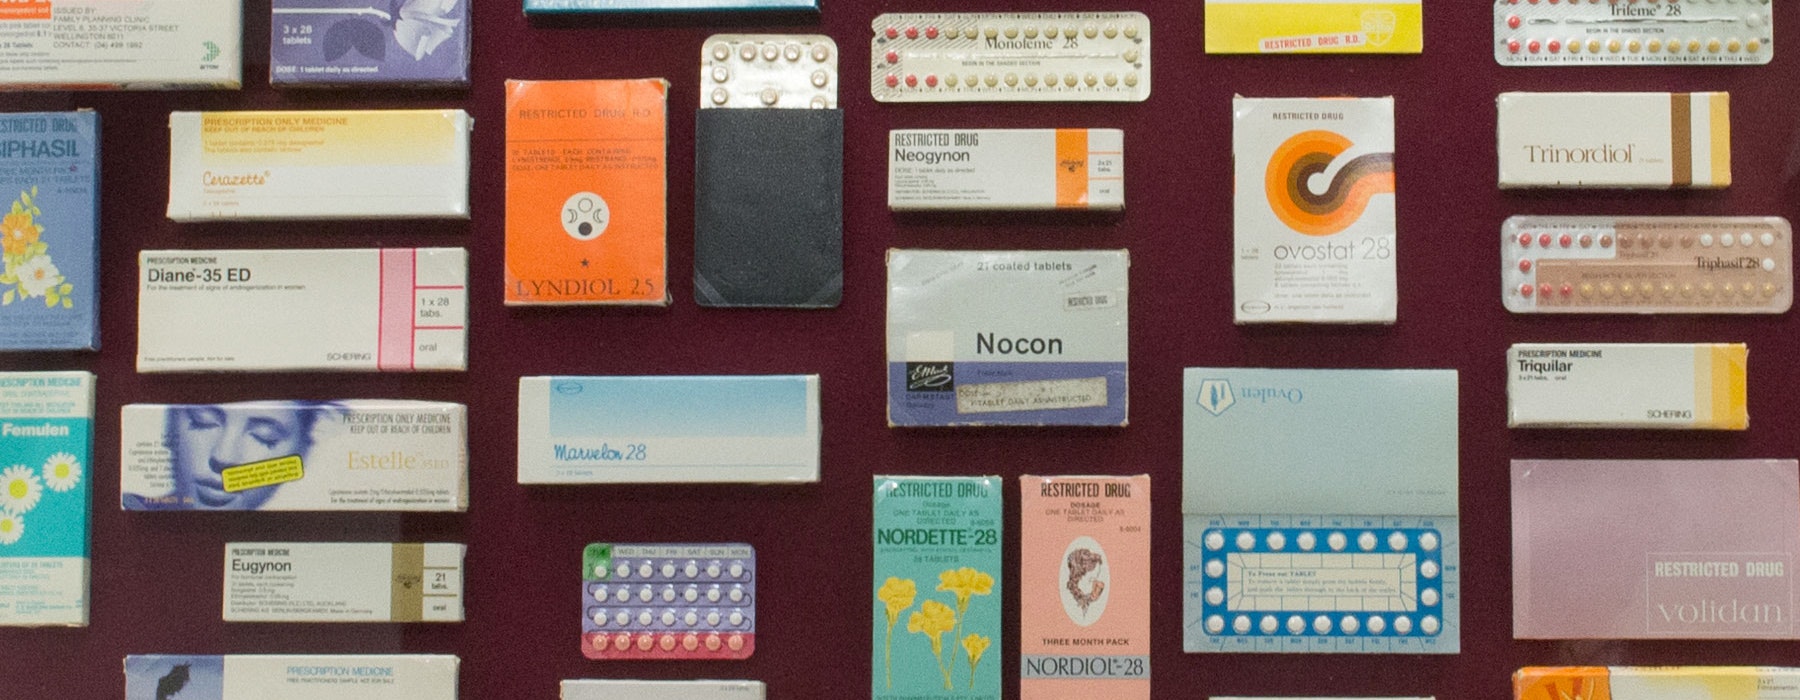 Contraception: Uncovering the collection of Dame Margaret Sparrow, 2015. Photograph by Kate Whitley. Te Papa